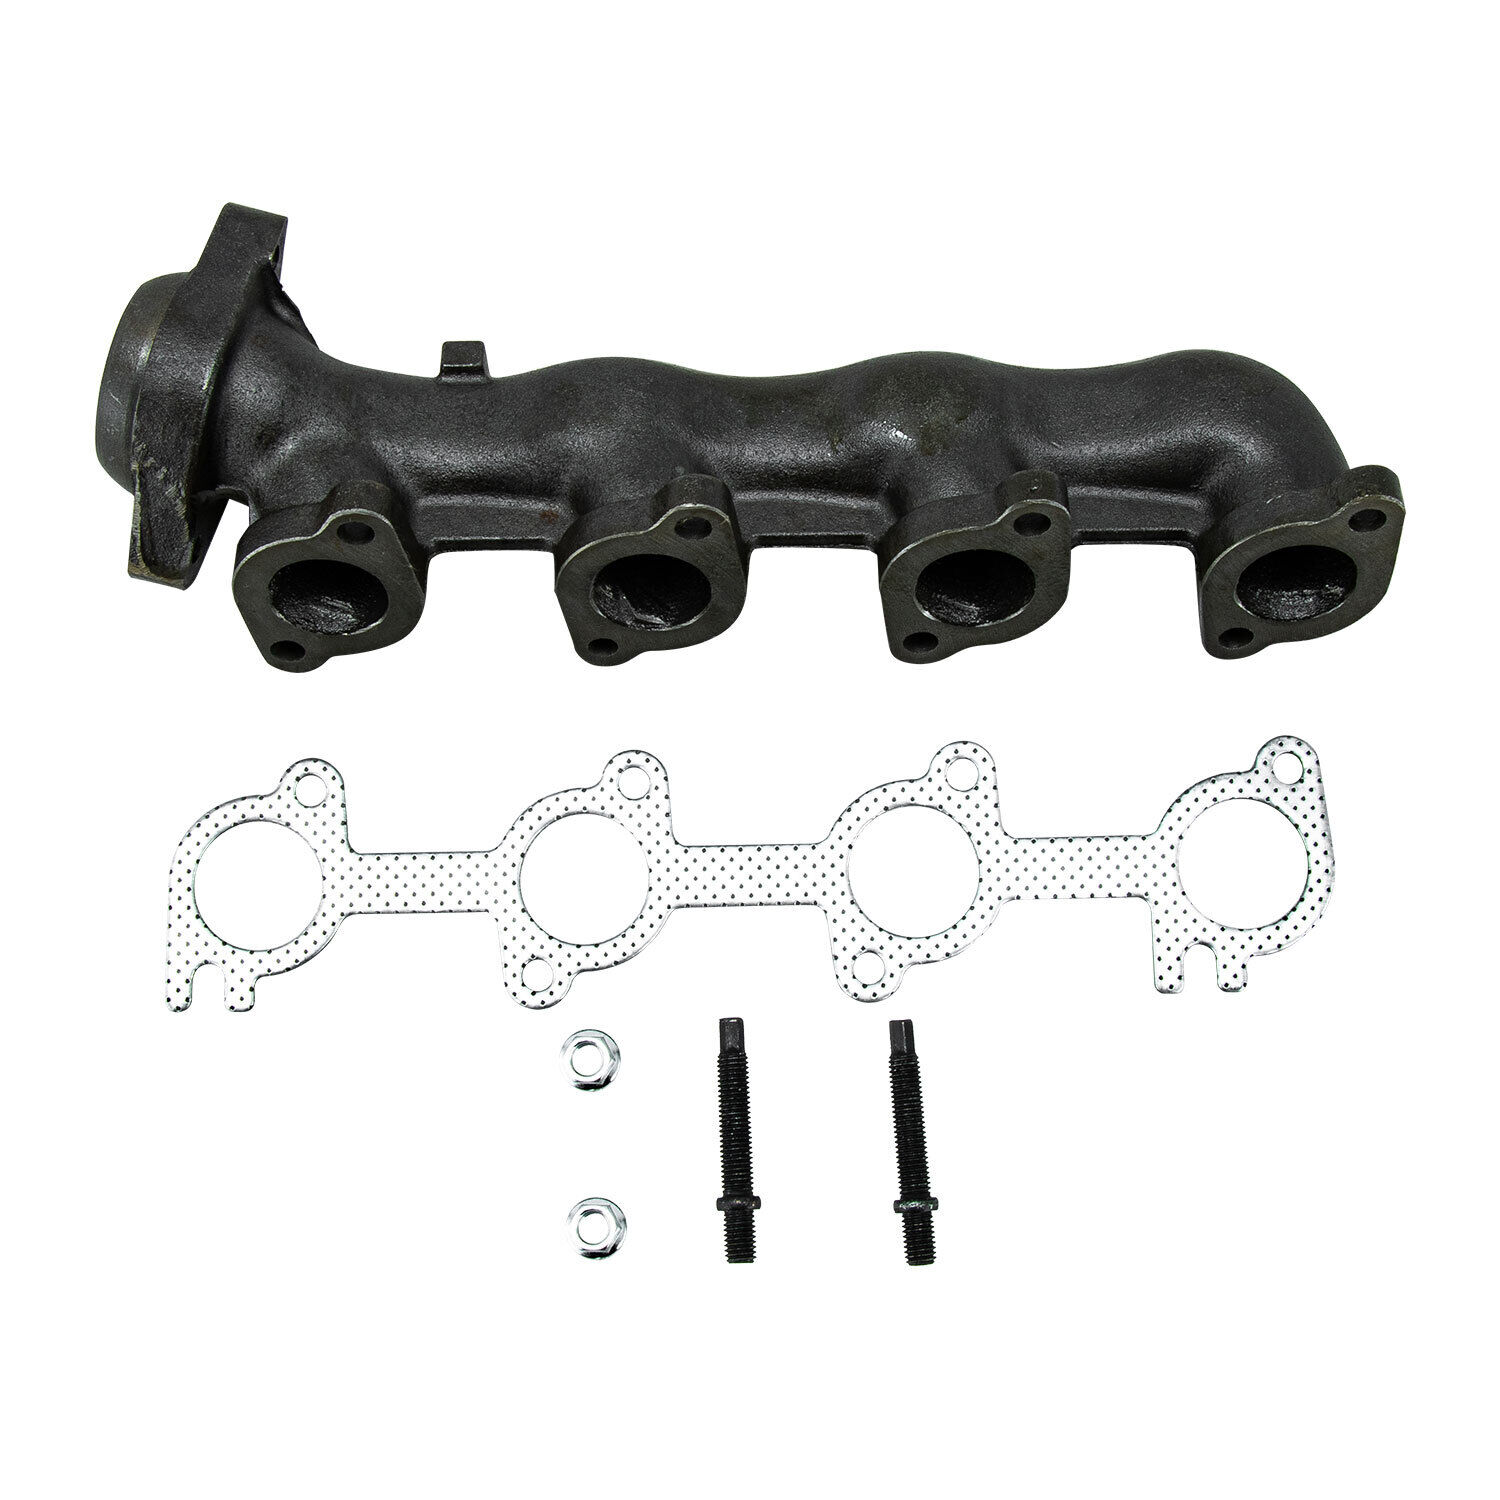 Exhaust Manifold Right For 1997-98 Expedition F-Series Pickup Truck 4.6L 280ci